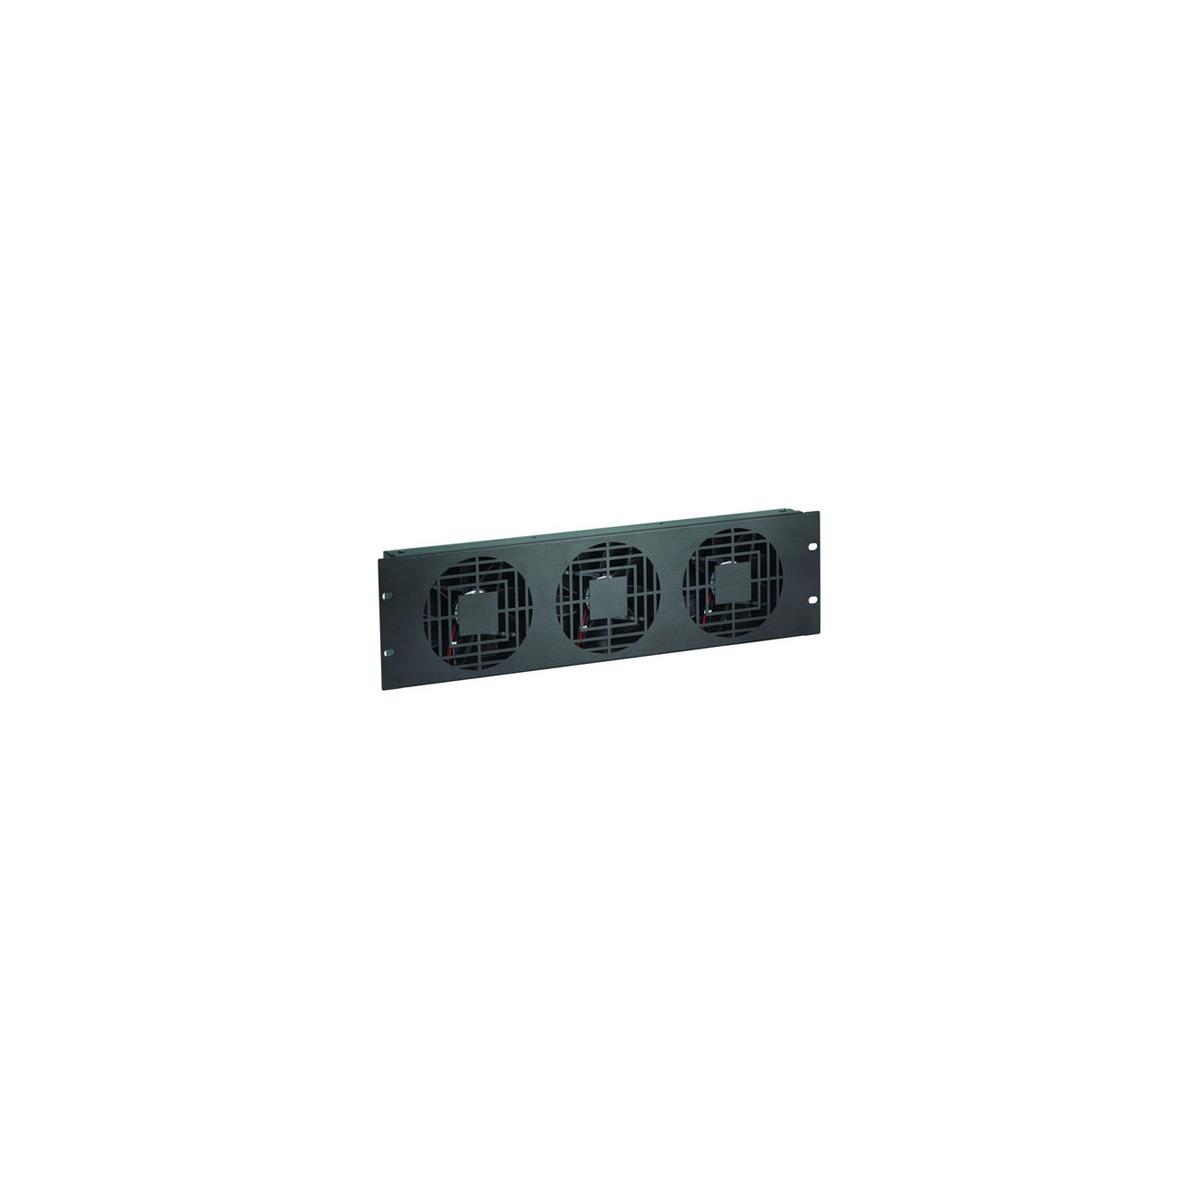 Raxxess 3U High Flow Triple Fan Panels The Raxxess 3U High Flow Triple Fan Panels moves 300 CFM of air. The front panel is made of attractive brushed black anodized aluminum to fit into any setting. Power supply is auto-ranging from 110 to 240VAC and 50 or 60 Hz.